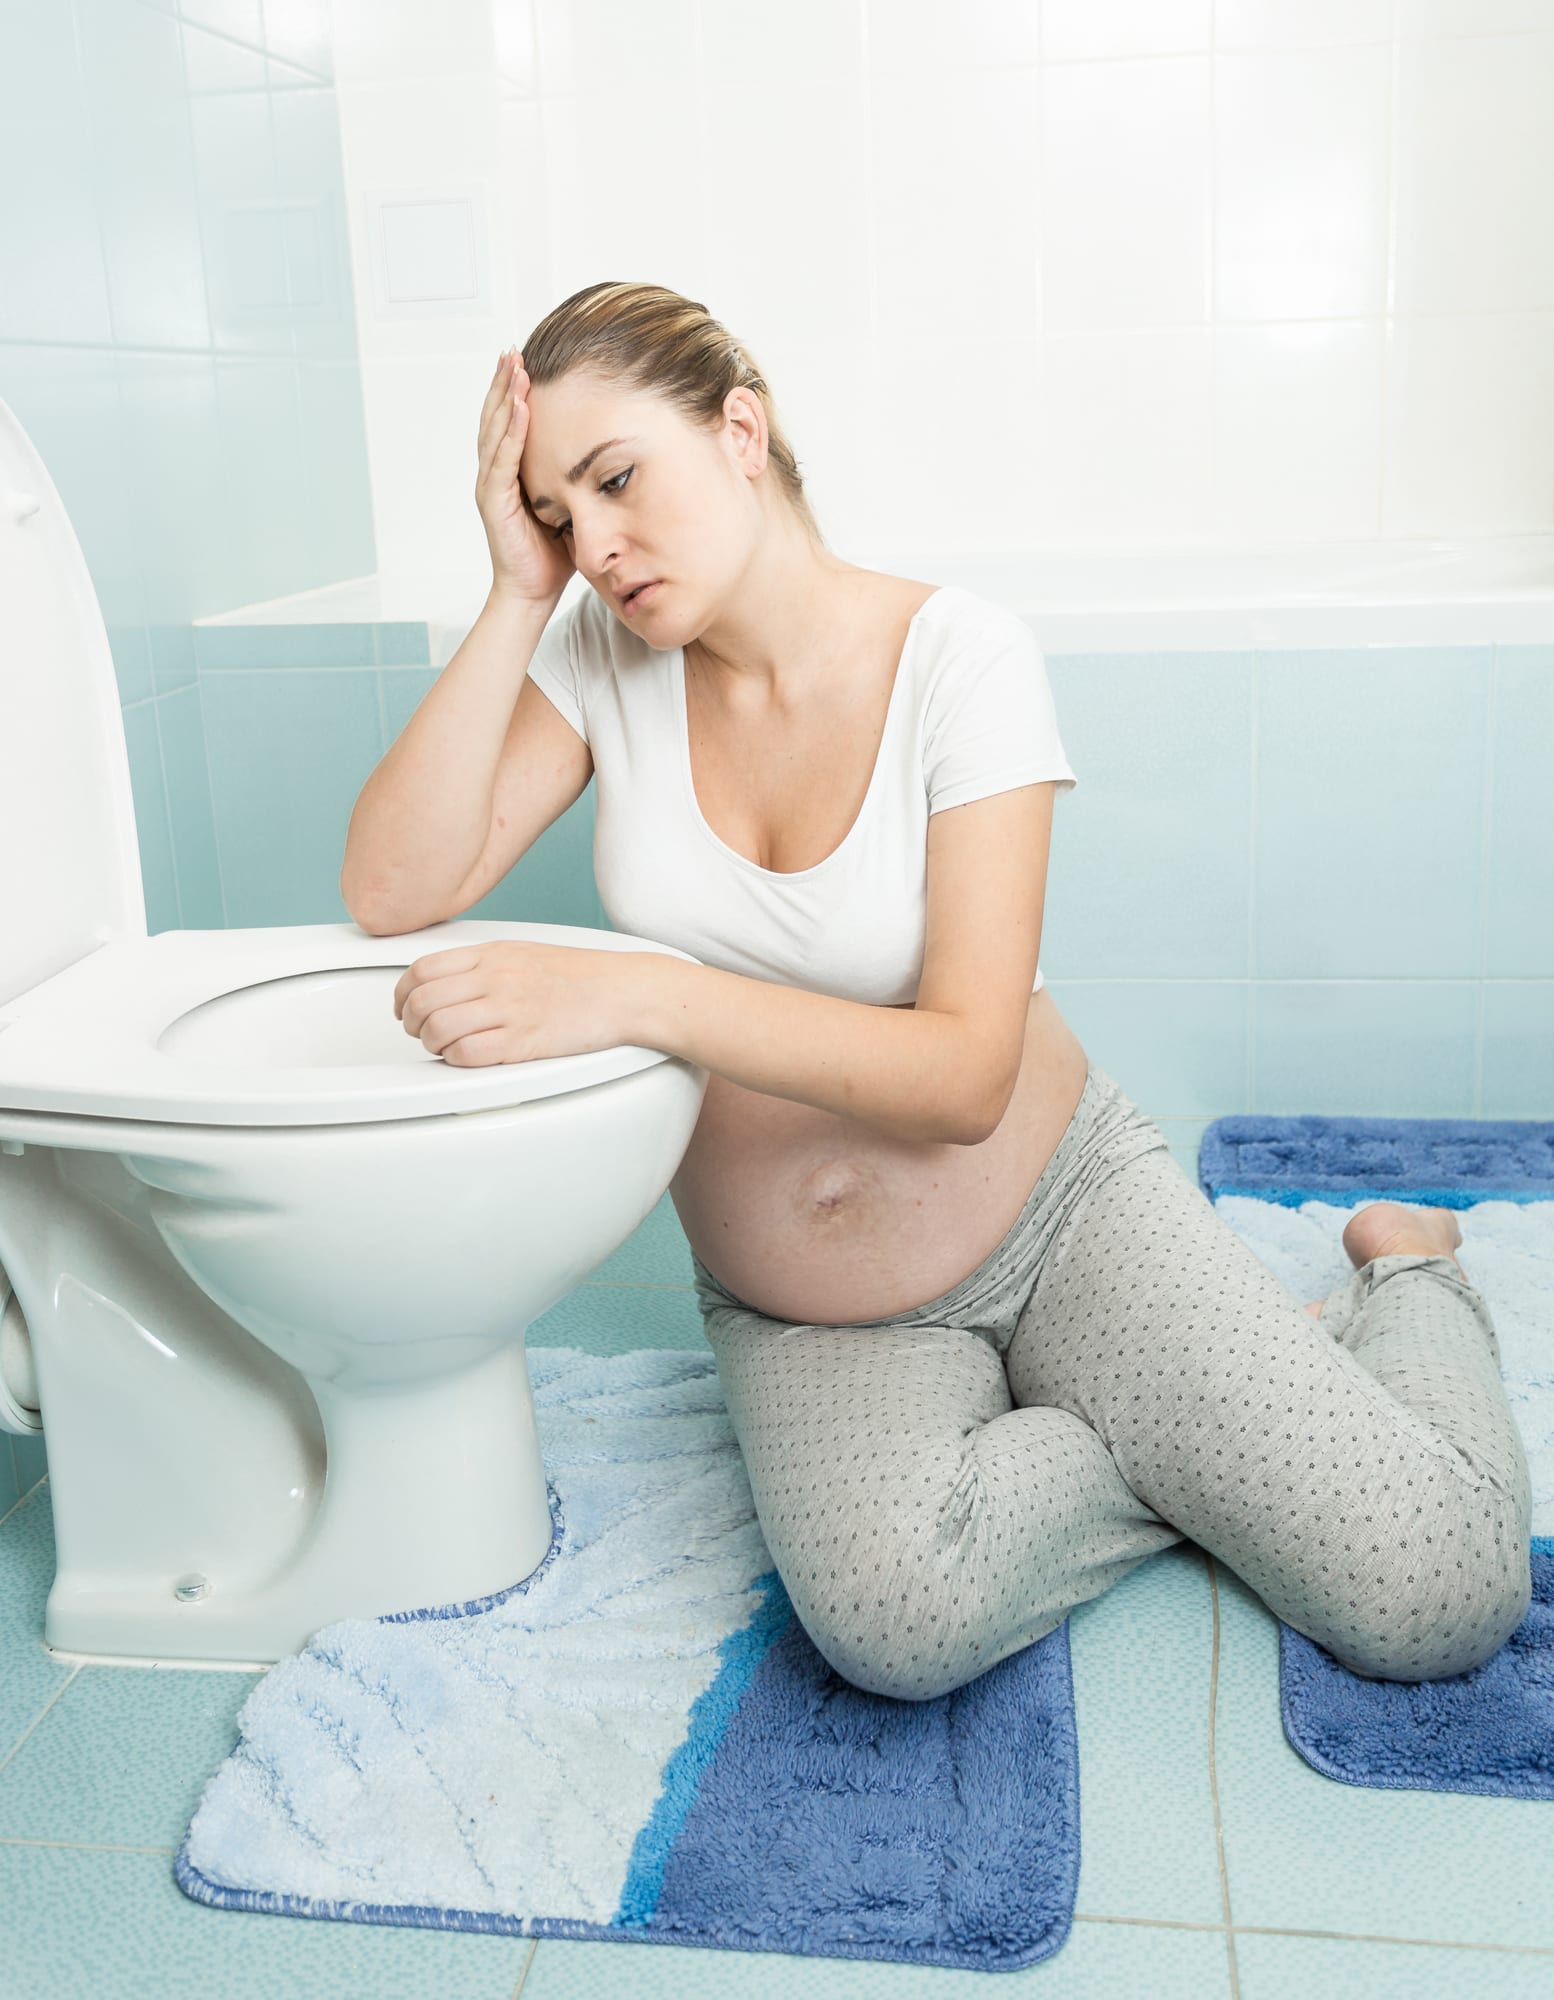 Things no one tells you about pregnancy #pregnancysymptoms #pregnancyproblems #firsttrimester #secondtrimester #thirdtrimester #morningsickness